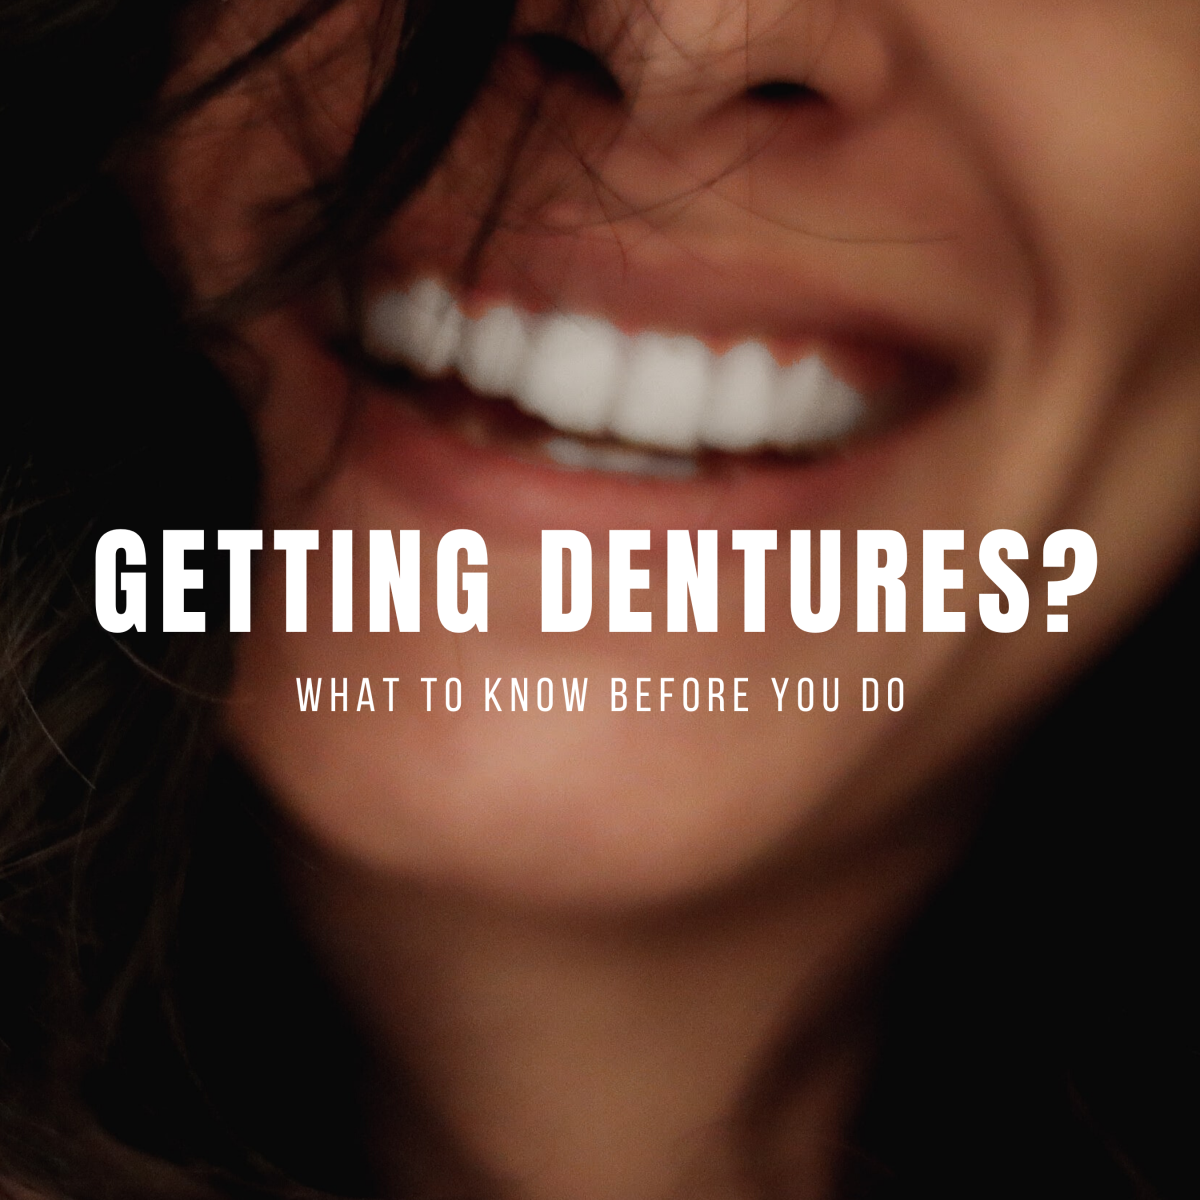 Questions about what it's like getting dentures as a young person? Here, I share my experience.